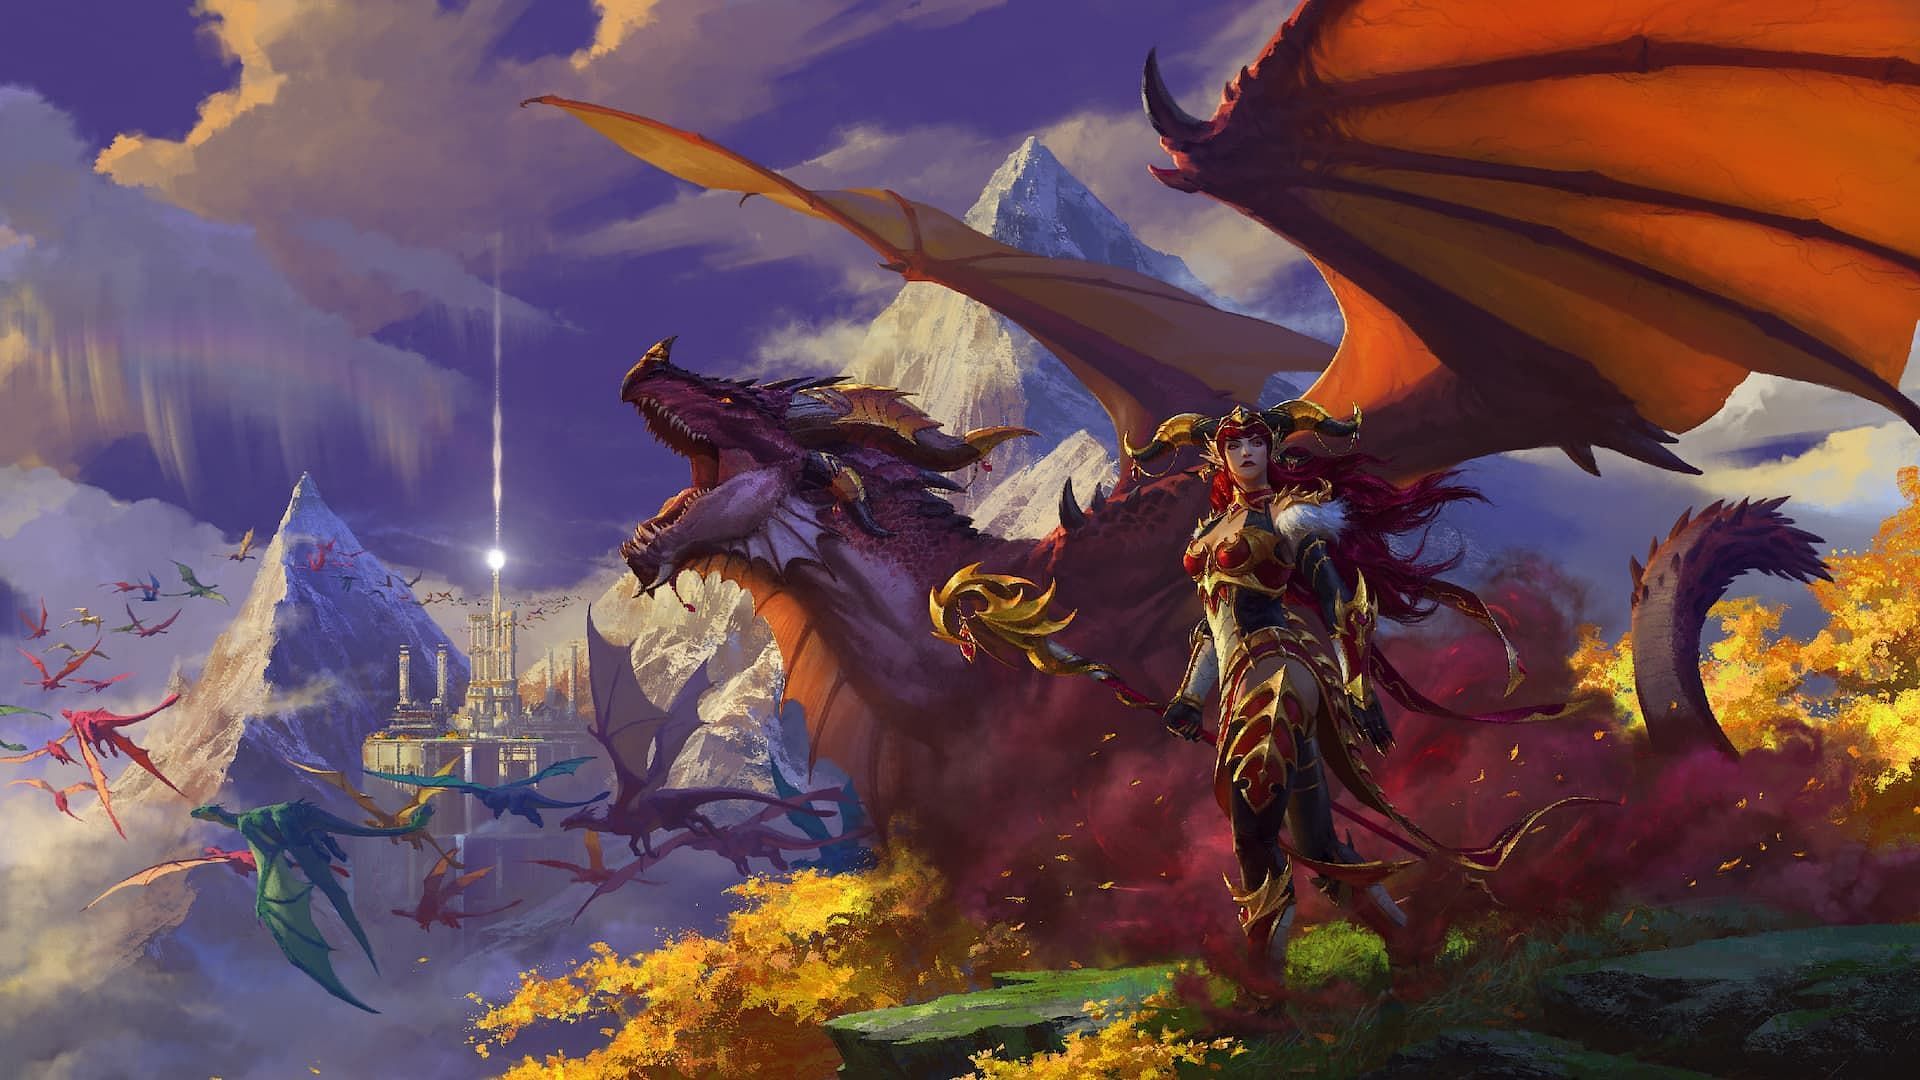 Dragonflight introduced new difficult dungeons in World of Warcraft (Image via Blizzard Entertainment)